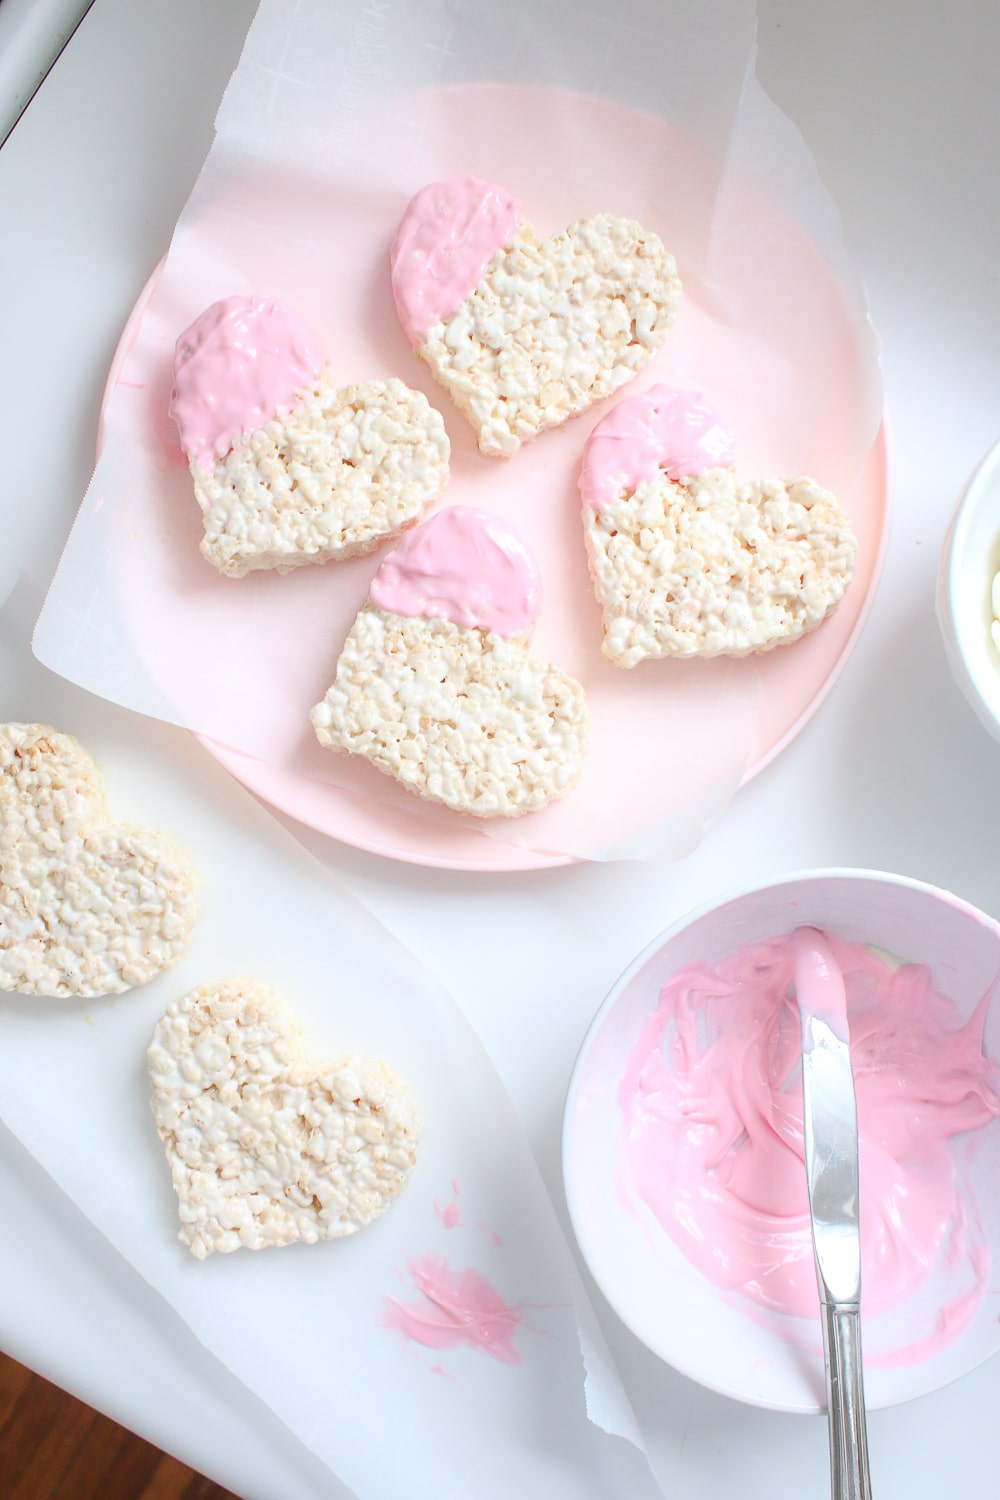 Heart shaped rice krispie treats recipe for Valentine's Day by southern lifestyle blogger Stephanie Ziajka of Diary of a Debutante